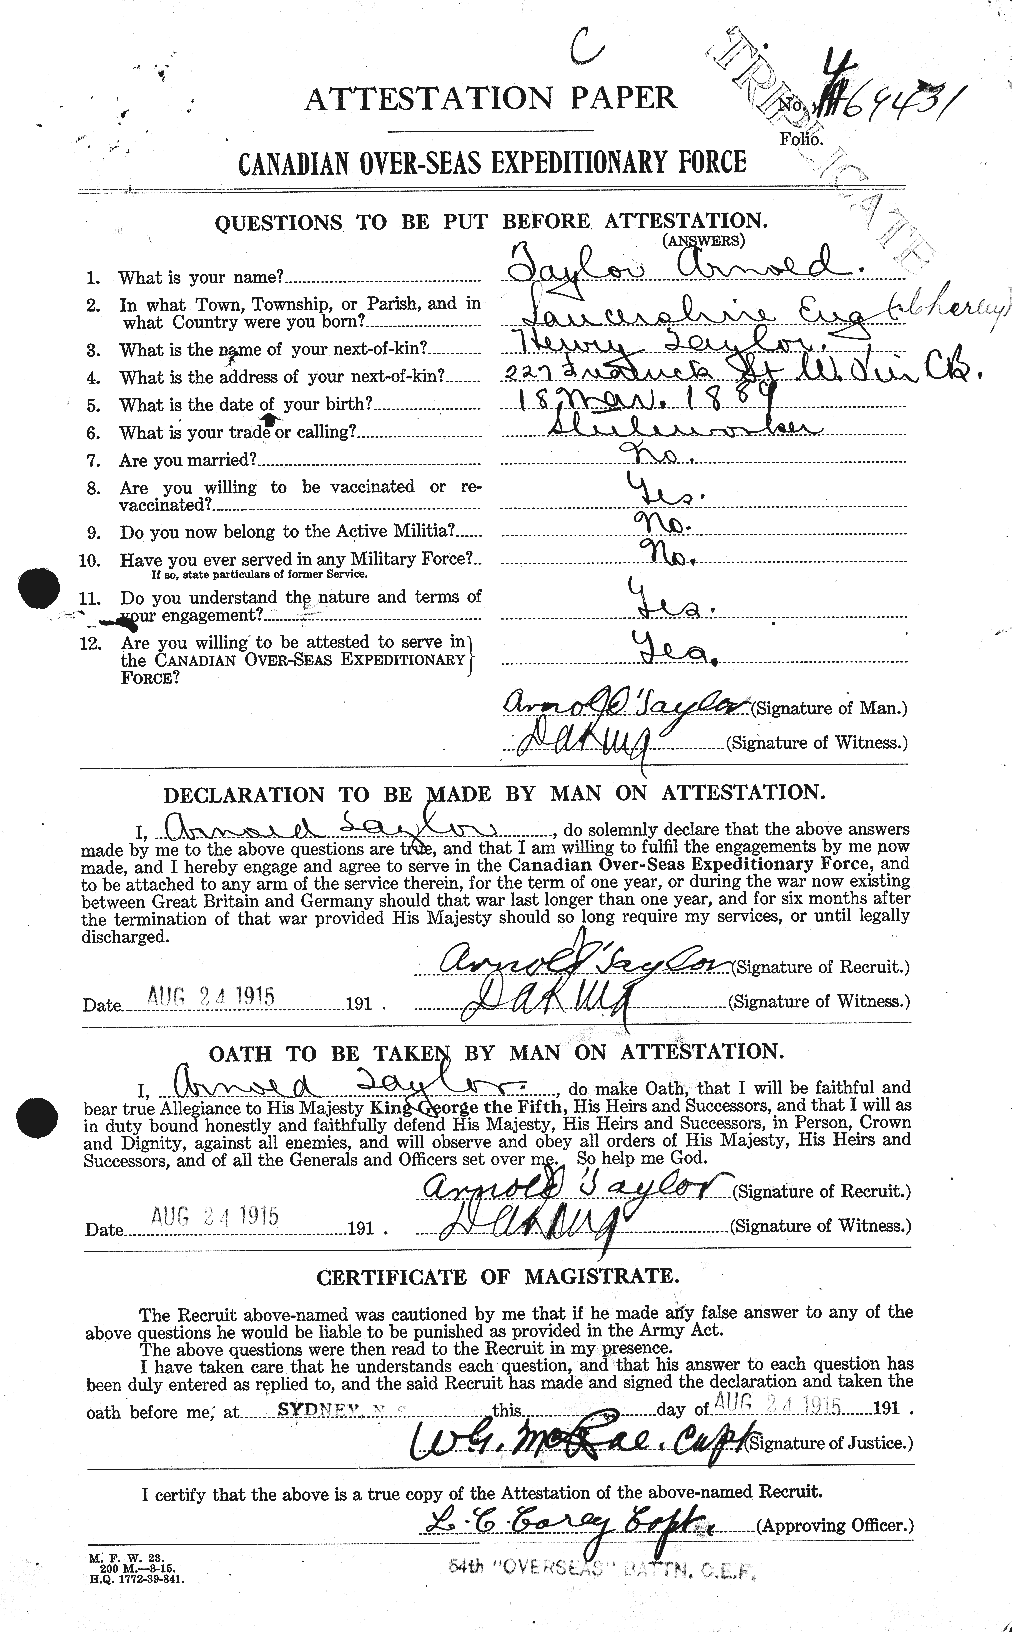 Personnel Records of the First World War - CEF 626253a